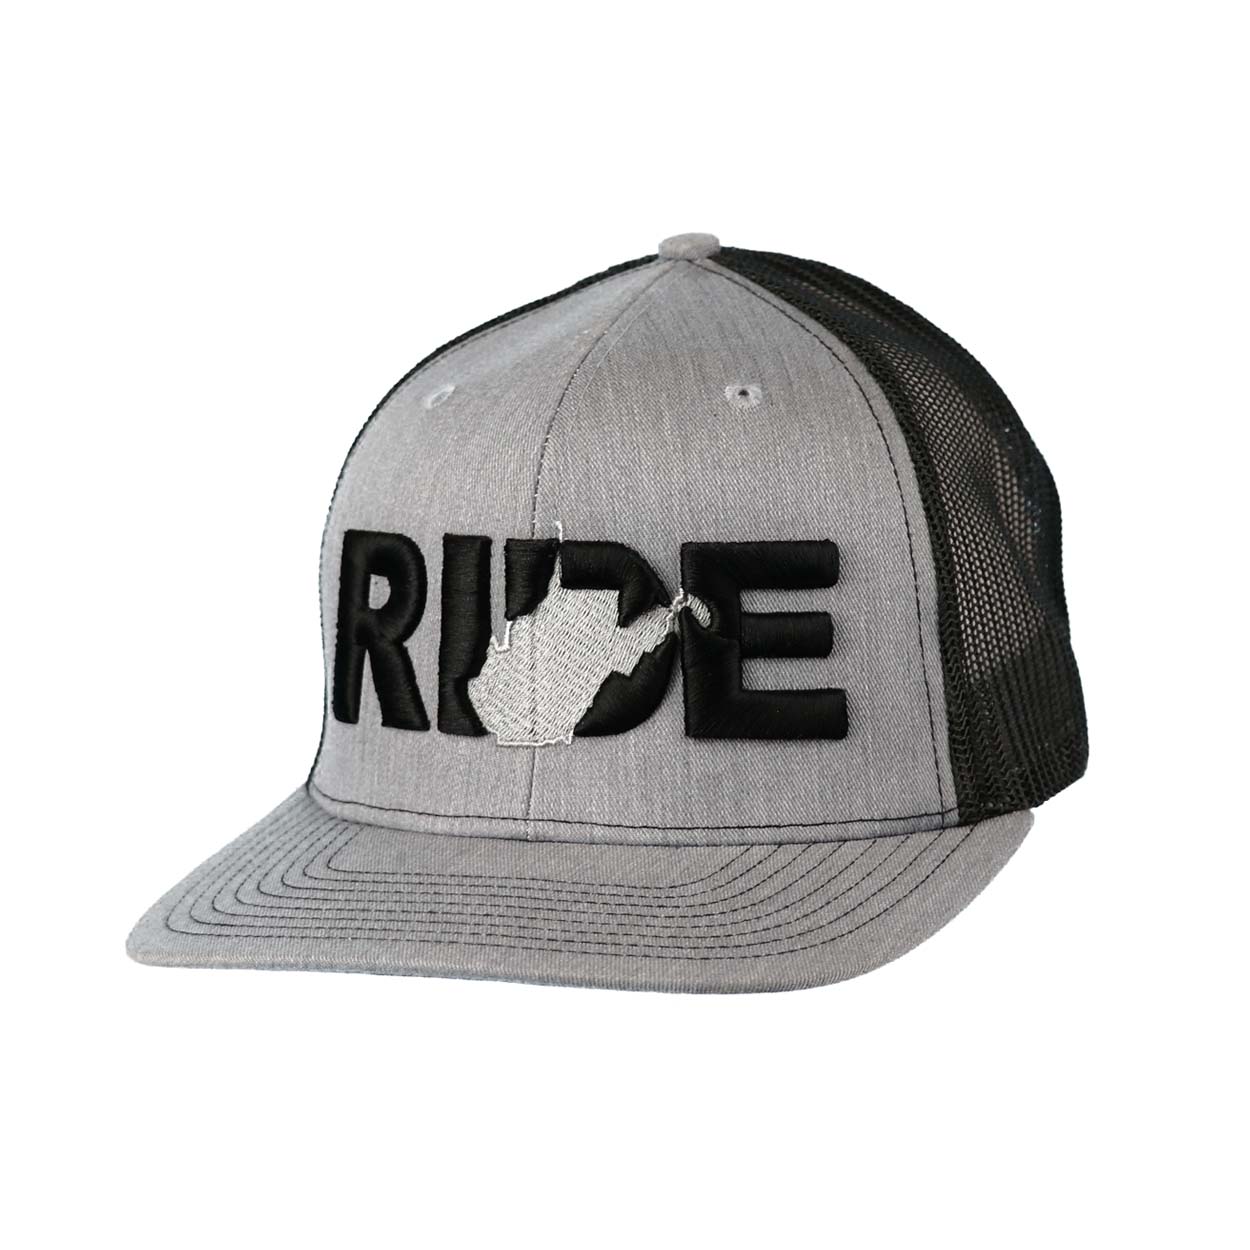 Ride West Virginia Classic Embroidered Snapback Trucker Hat Heather Gray/Black